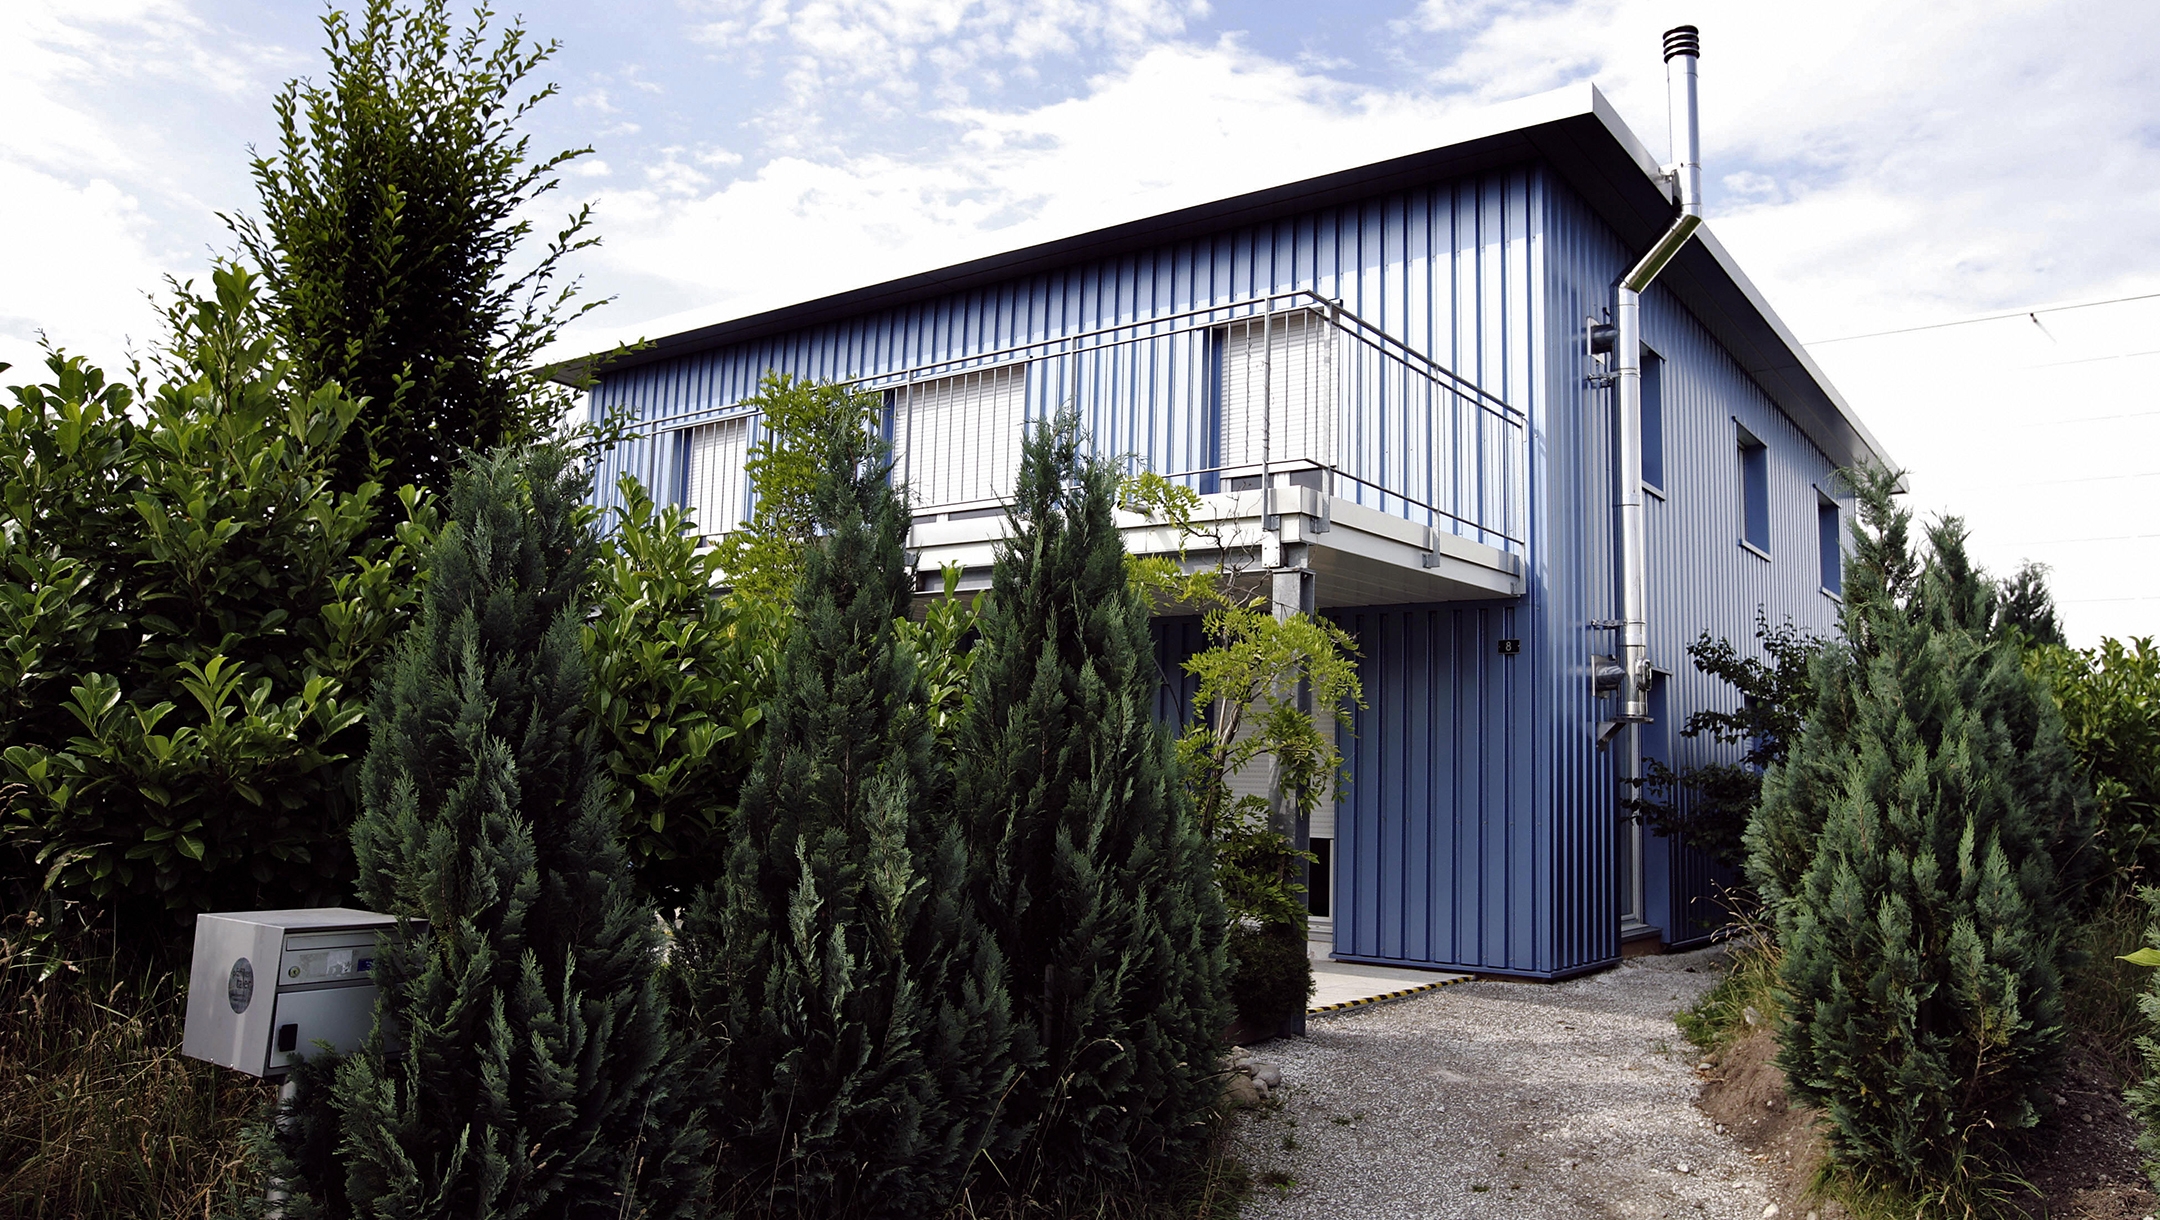 The building of the assisted suicide clinic, Dignitas in Pfaeffikon near Zurich. (SEBASTIAN DERUNGS/AFP/Getty Images)